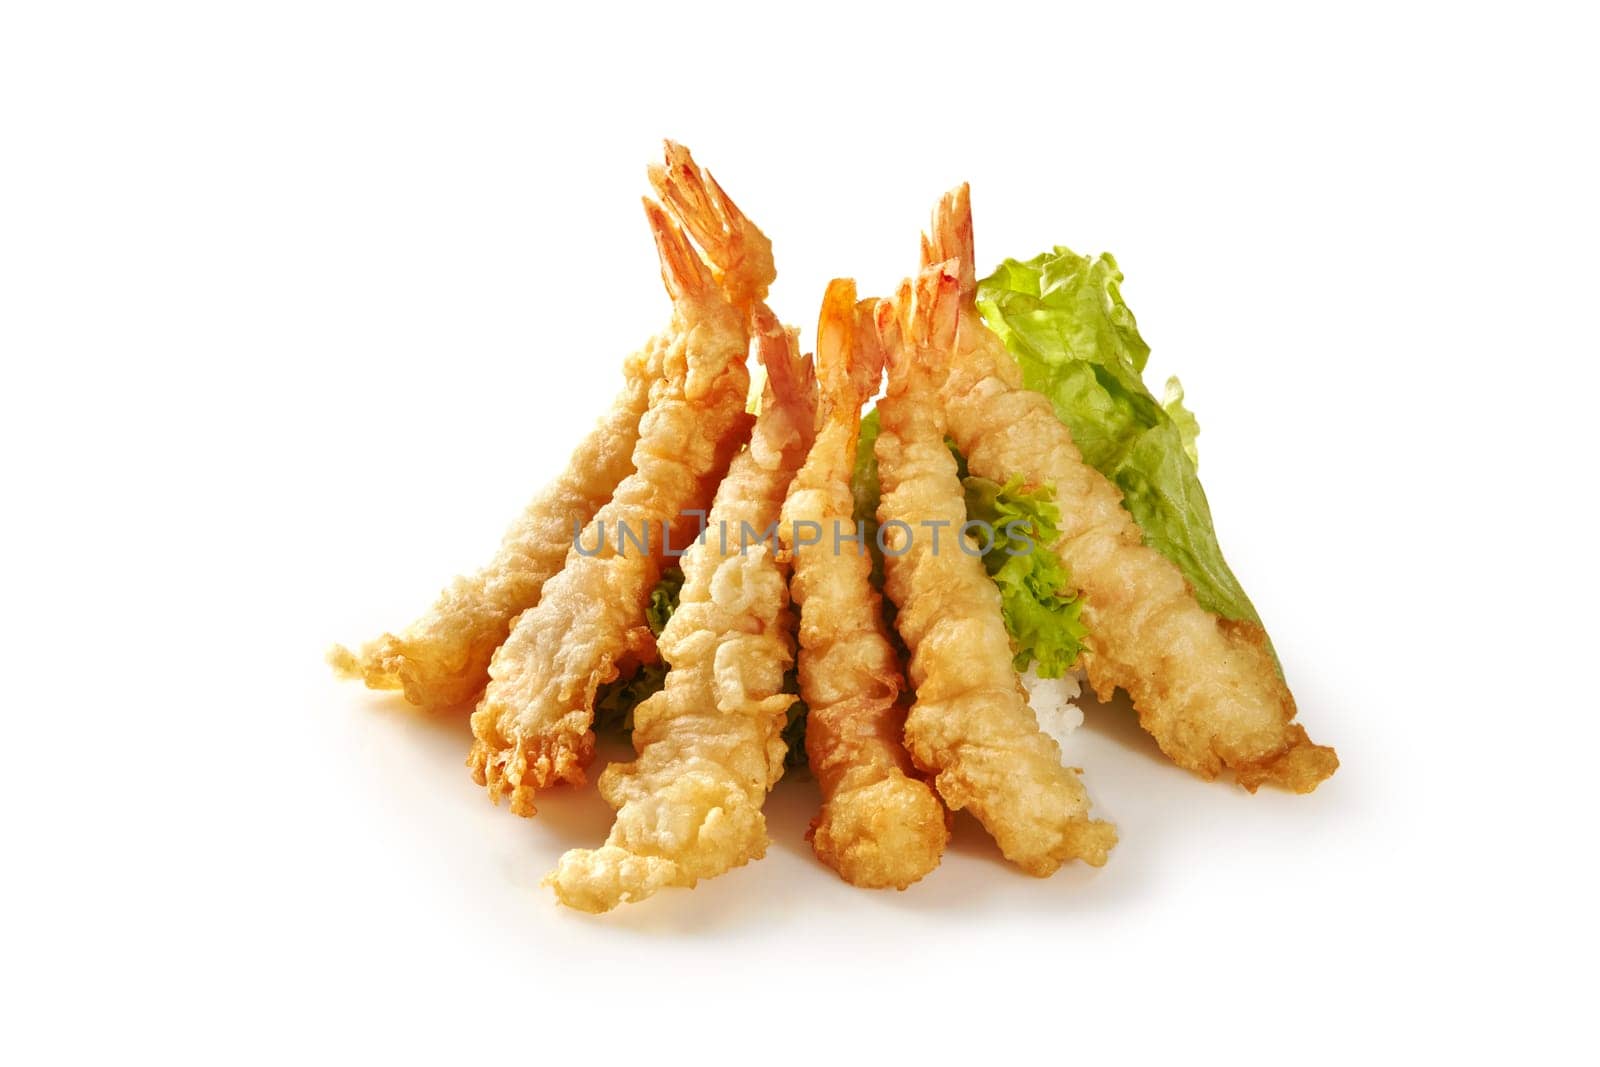 Teepee arrangement of golden crispy tempura tiger shrimps paired with rice and fresh green lettuce, showcasing Japanese cooking technique